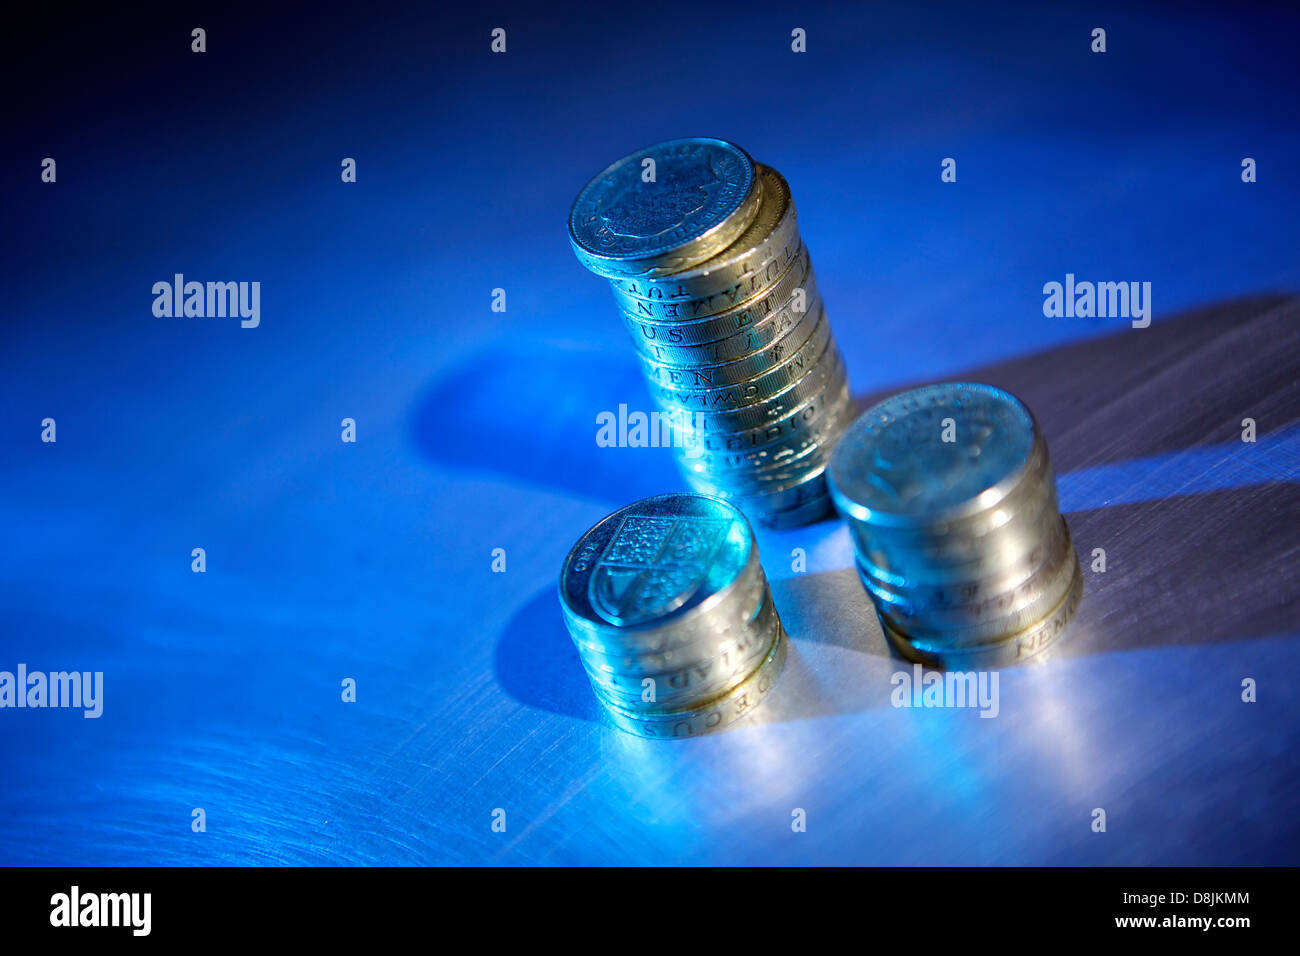 Pound Stirling Coins Stacked on Brushed Steel Surface Stock Photo